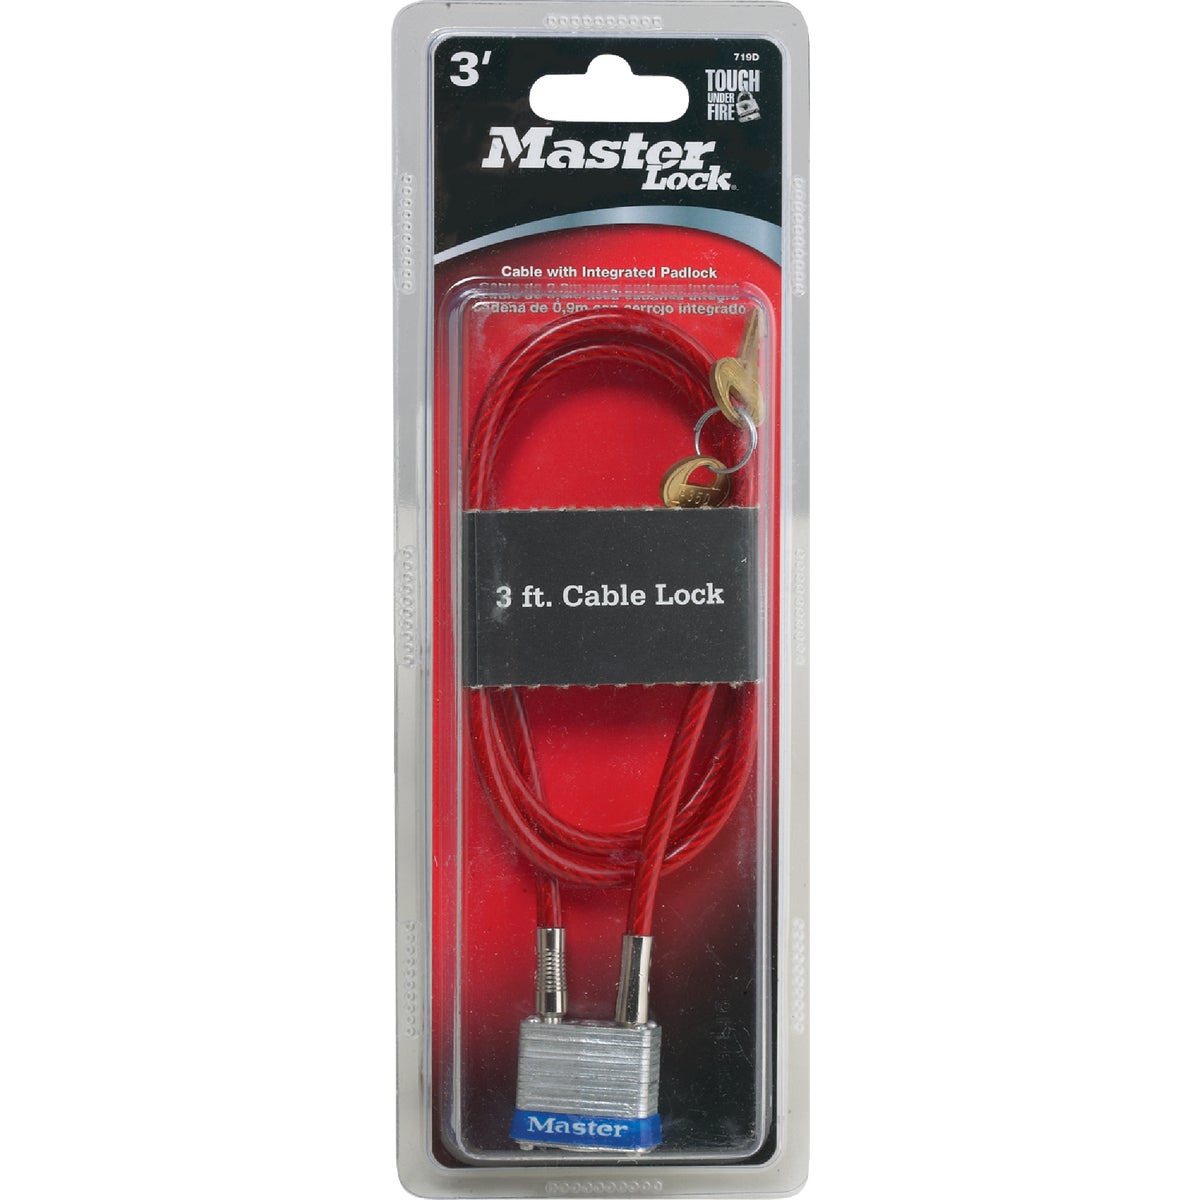 Item 234179, Flexible intertwined steel aircraft cable, gold vinyl-coated.